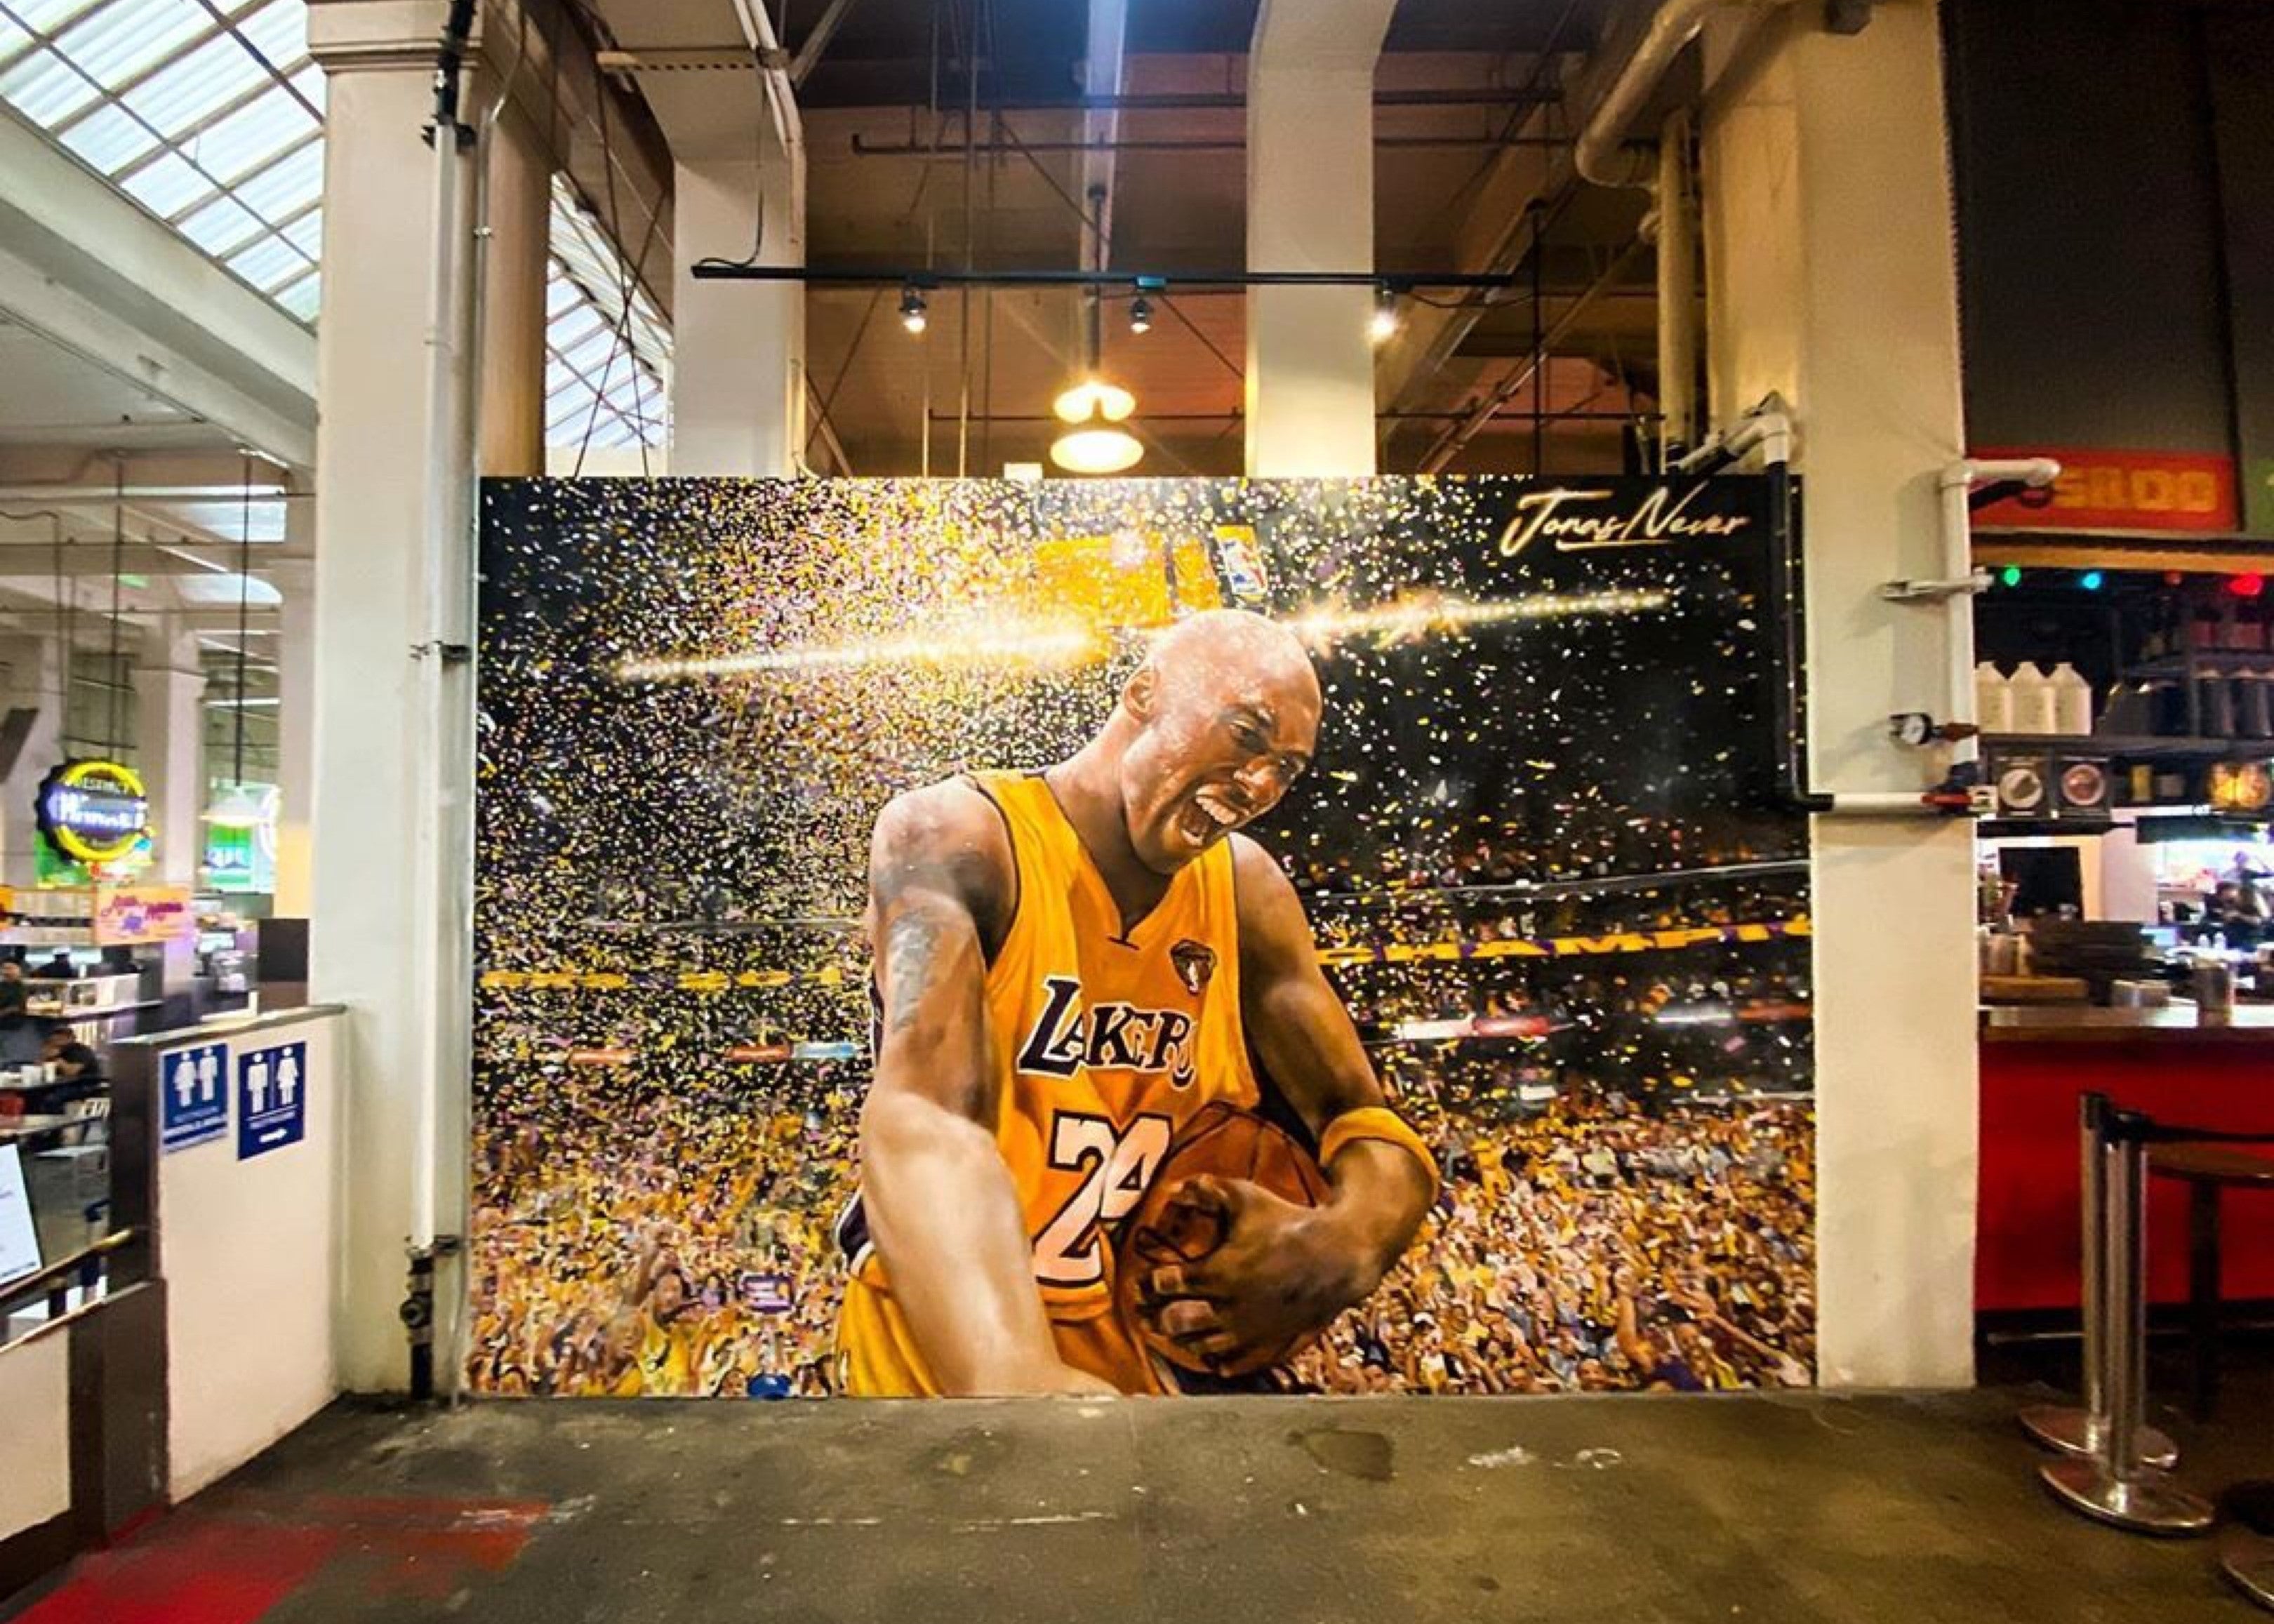 Discover Kobe Bryant Murals in Los Angeles | Discover Los Angeles